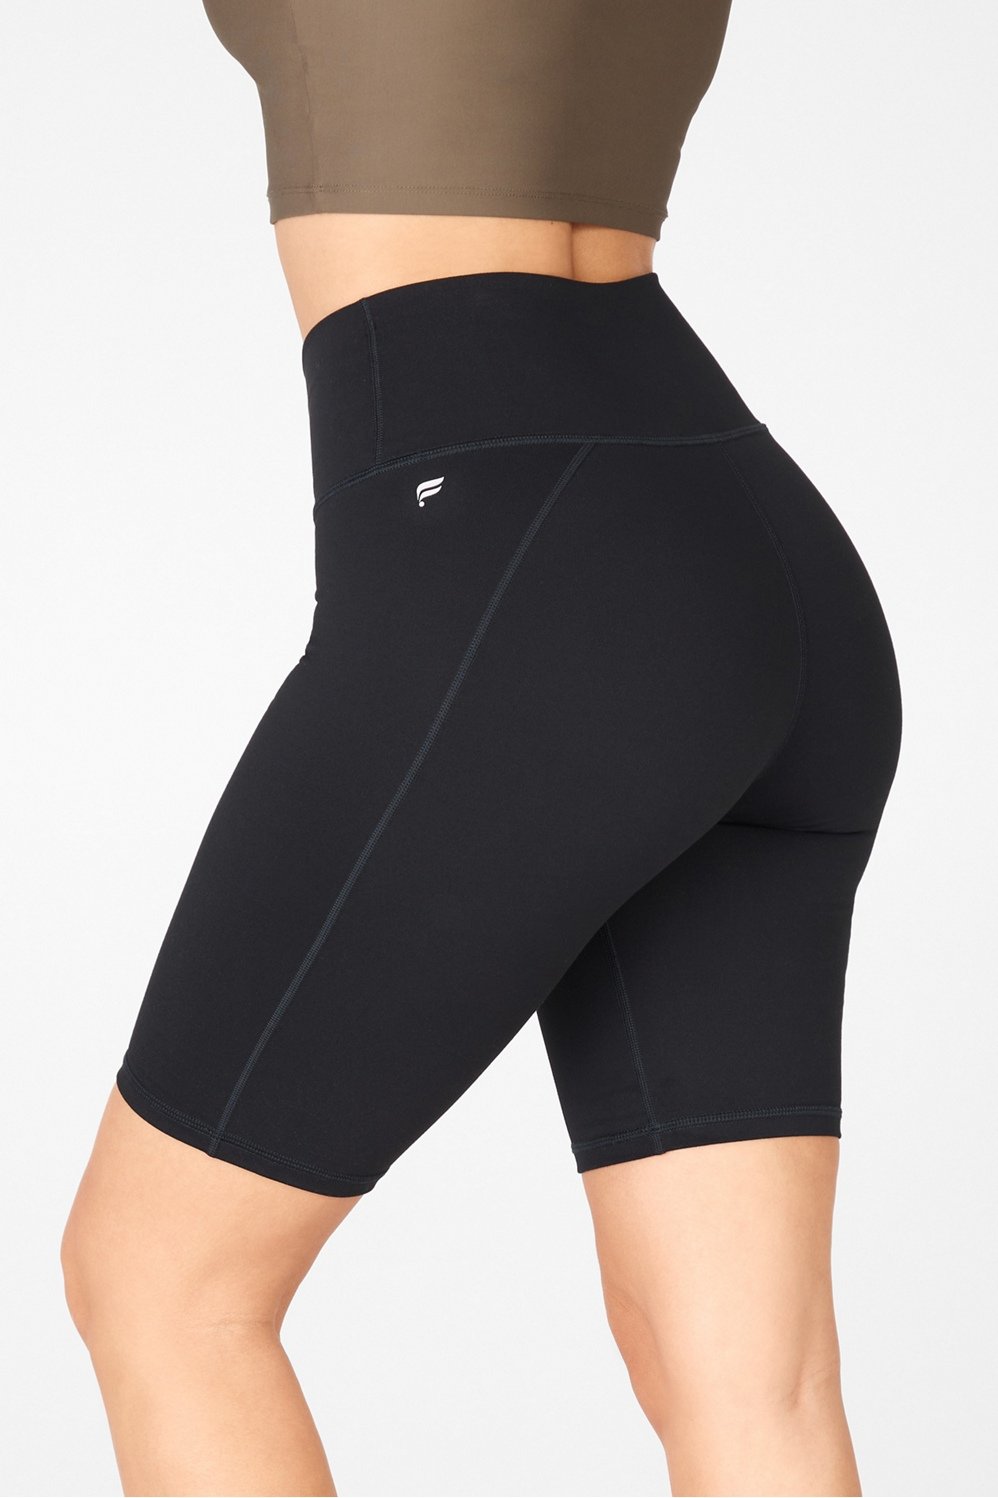 Fabletics on X: Power Moves Call For PowerHold® The supportive